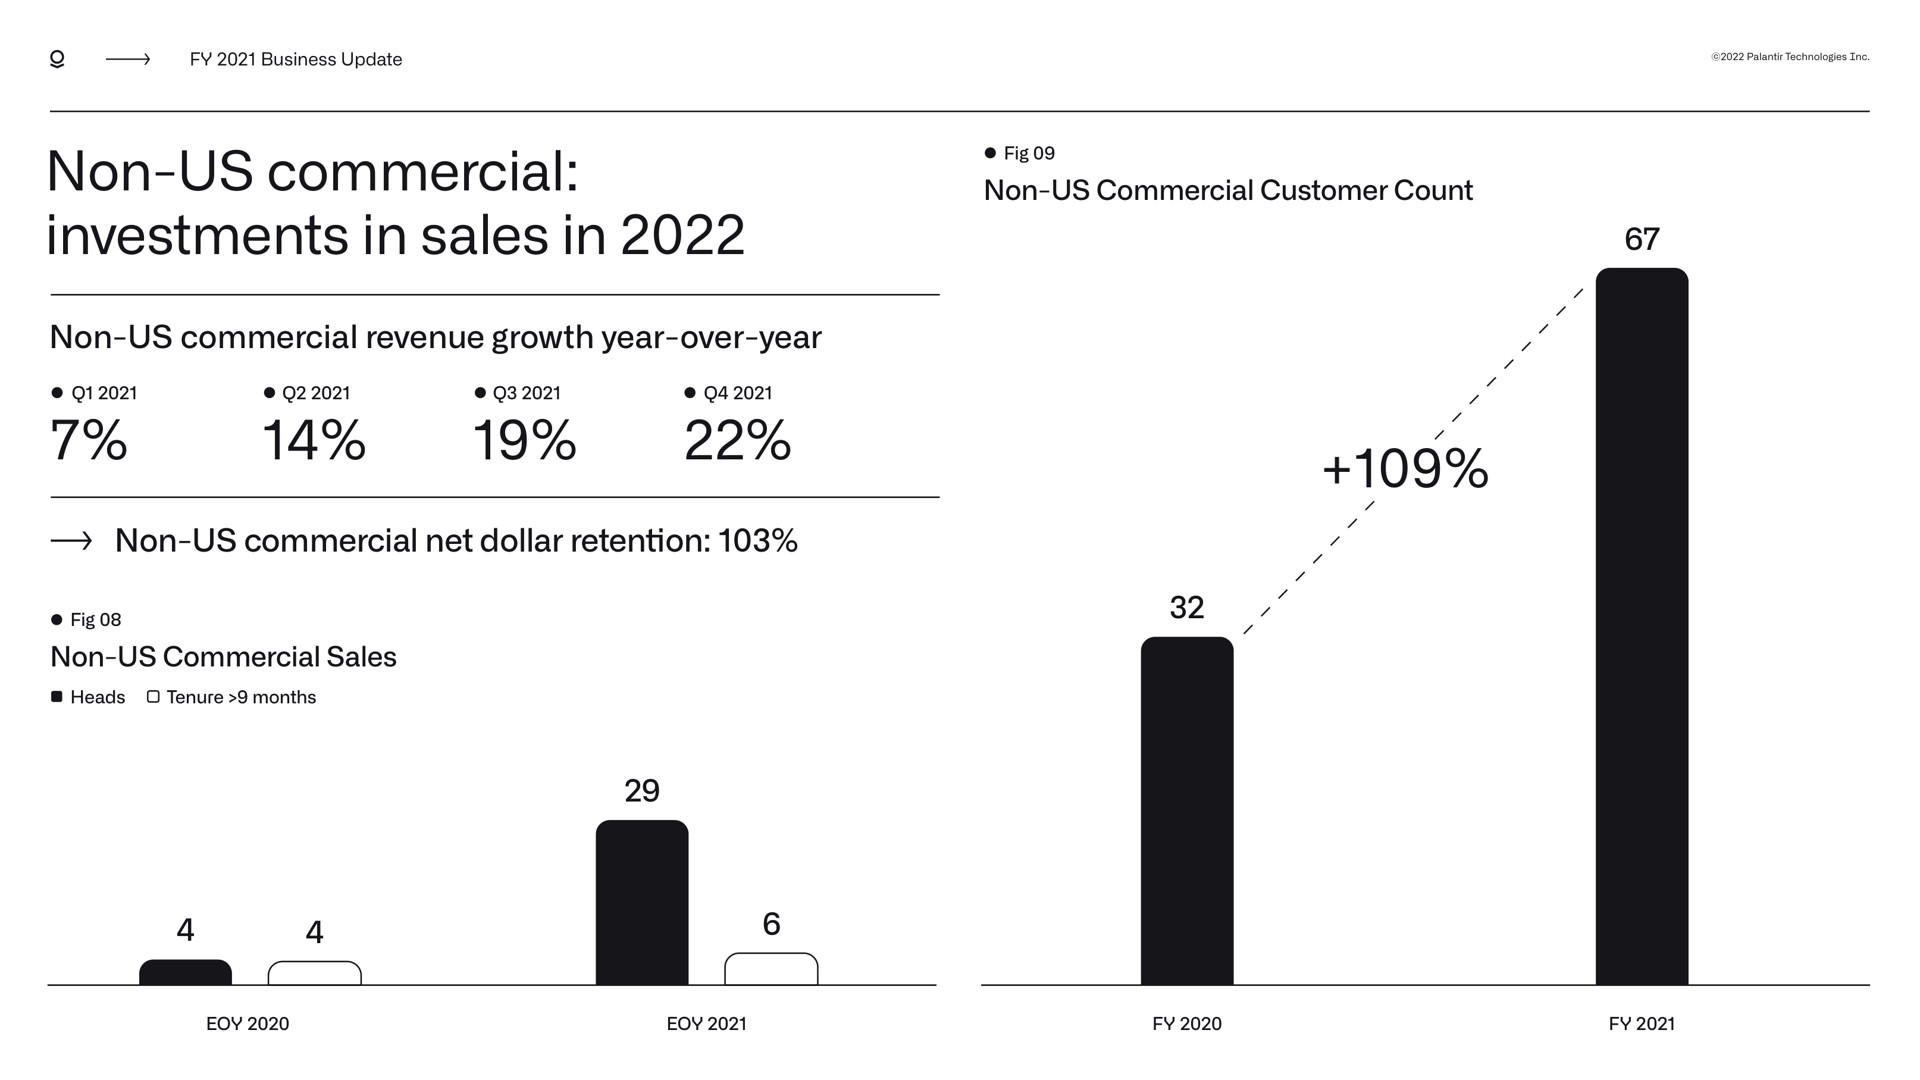 business update non us commercial investments in sales in fig non us commercial customer count non us commercial revenue growth year over year non us commercial net dollar retention fig non us commercial sales heads tenure months | Palantir